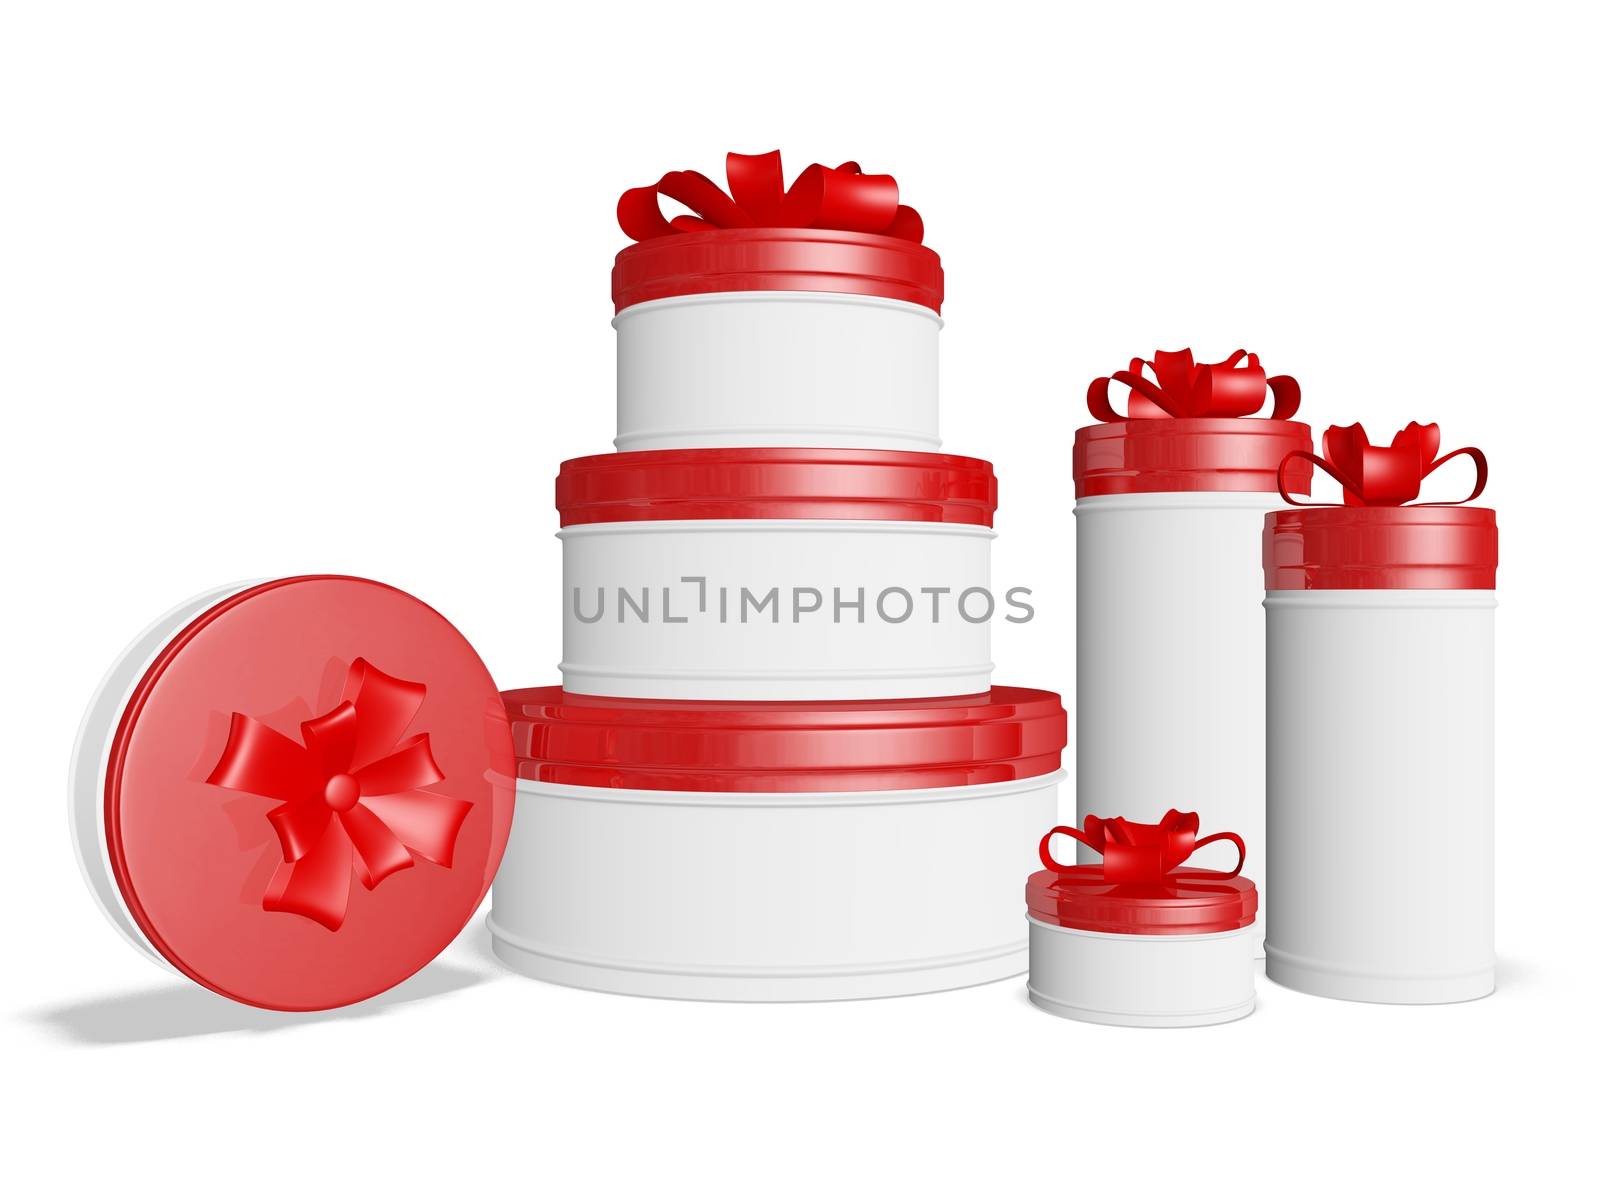 The 3D illustration has lots of round gift boxes with red lids and festive bow ribbons. It is ideal for use in festival, celebration, occasion, gifting and discount sales concepts. 
